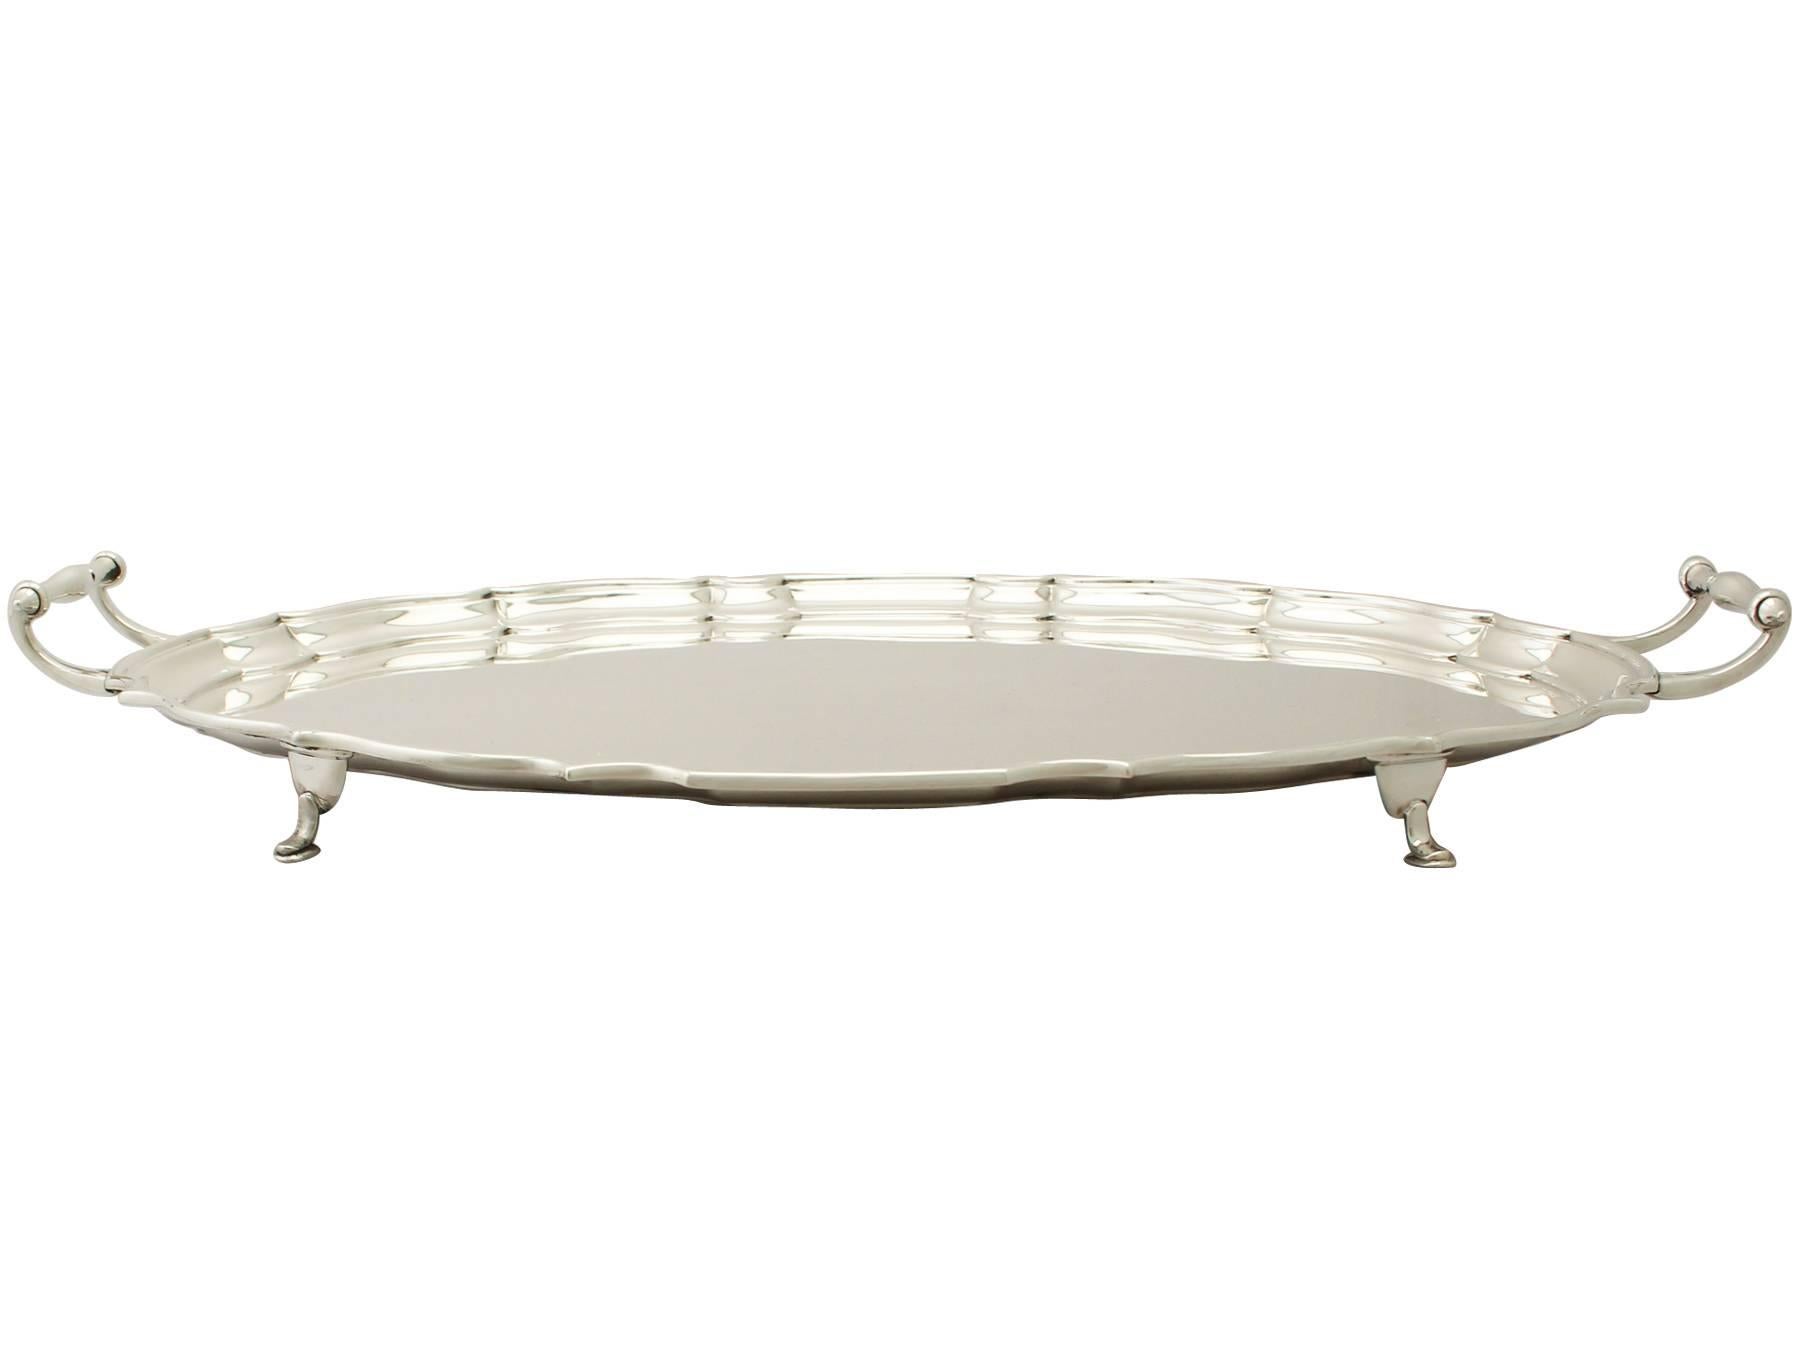 An exceptional, fine and impressive antique George V English sterling silver two-handled tea/drinks tray; an addition to our ornamental silverware collection.

This exceptional antique George V sterling silver drinks tray has a shaped oval